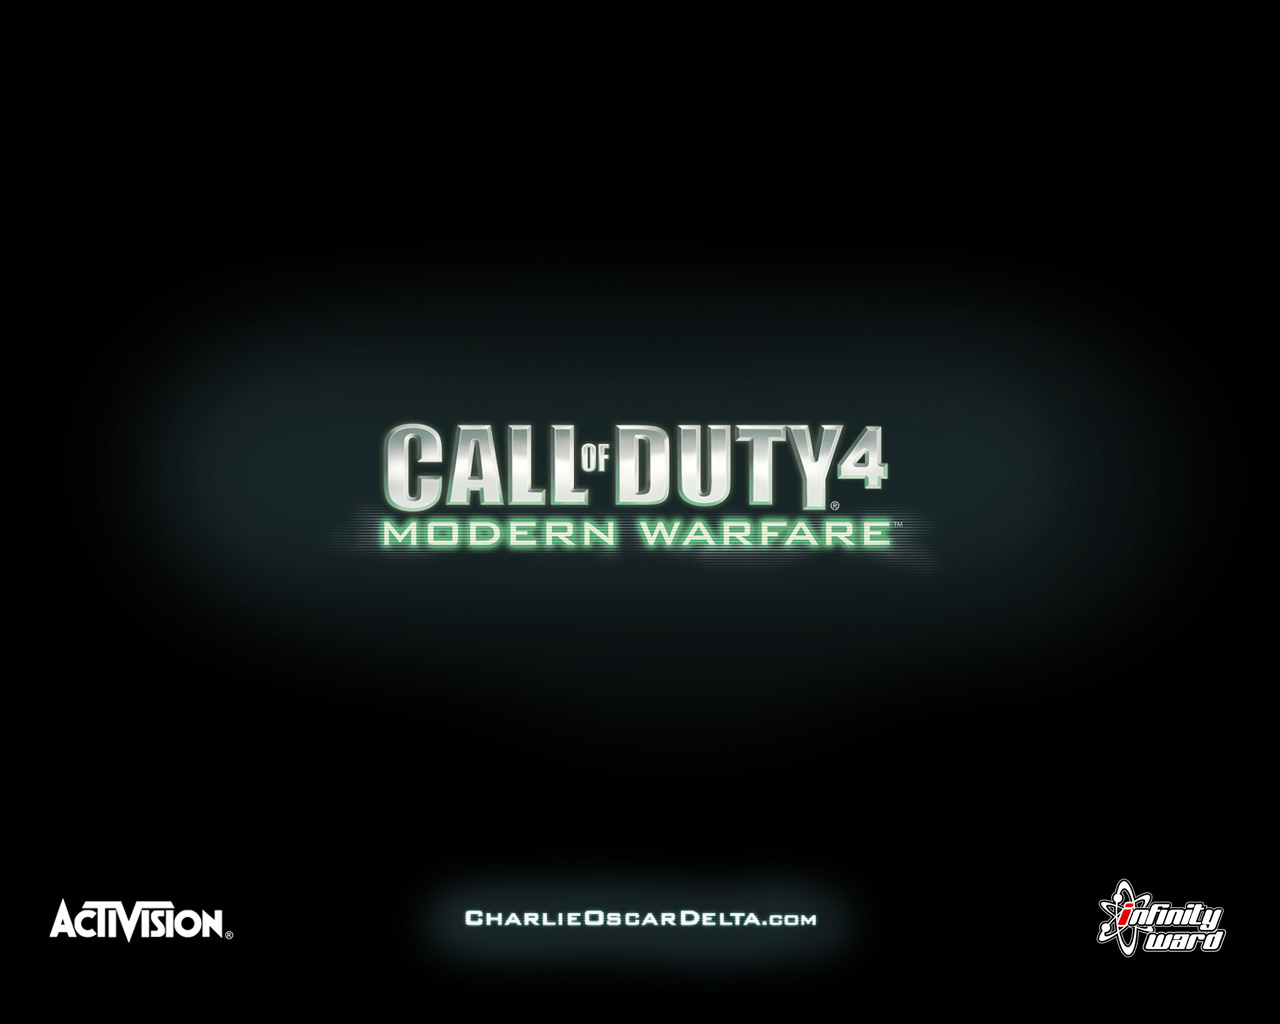 CoD4 Central CoD4 Wallpapers Call of Duty 4 Remaster